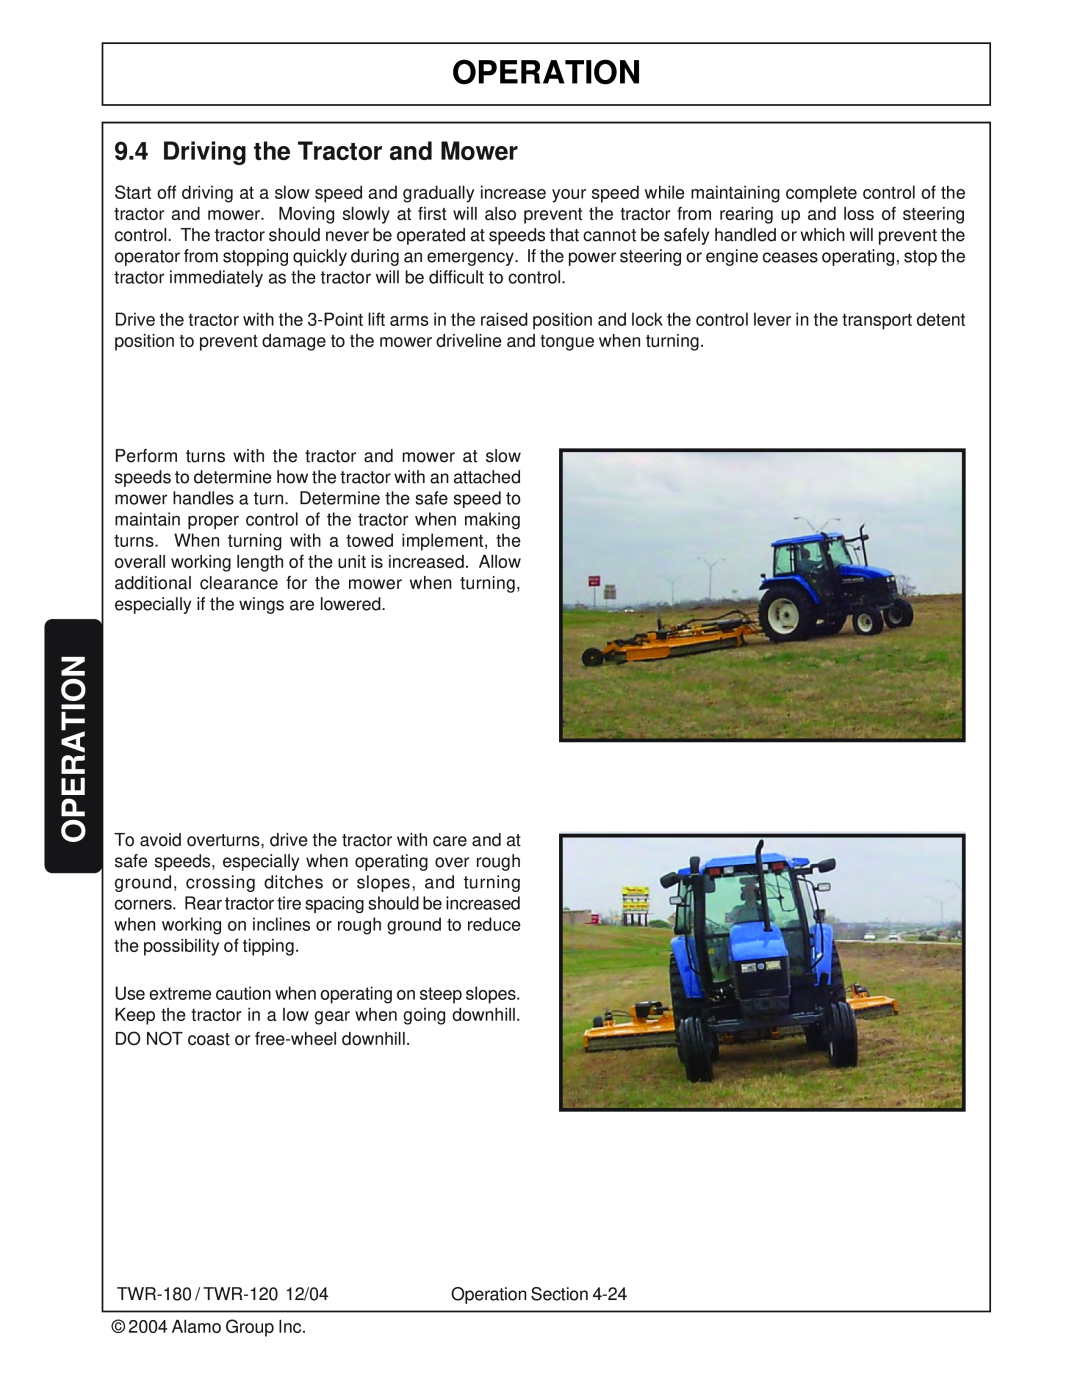 Tiger Products Co., Ltd TWR-180, TWR-120 manual Operation, Driving the Tractor and Mower 